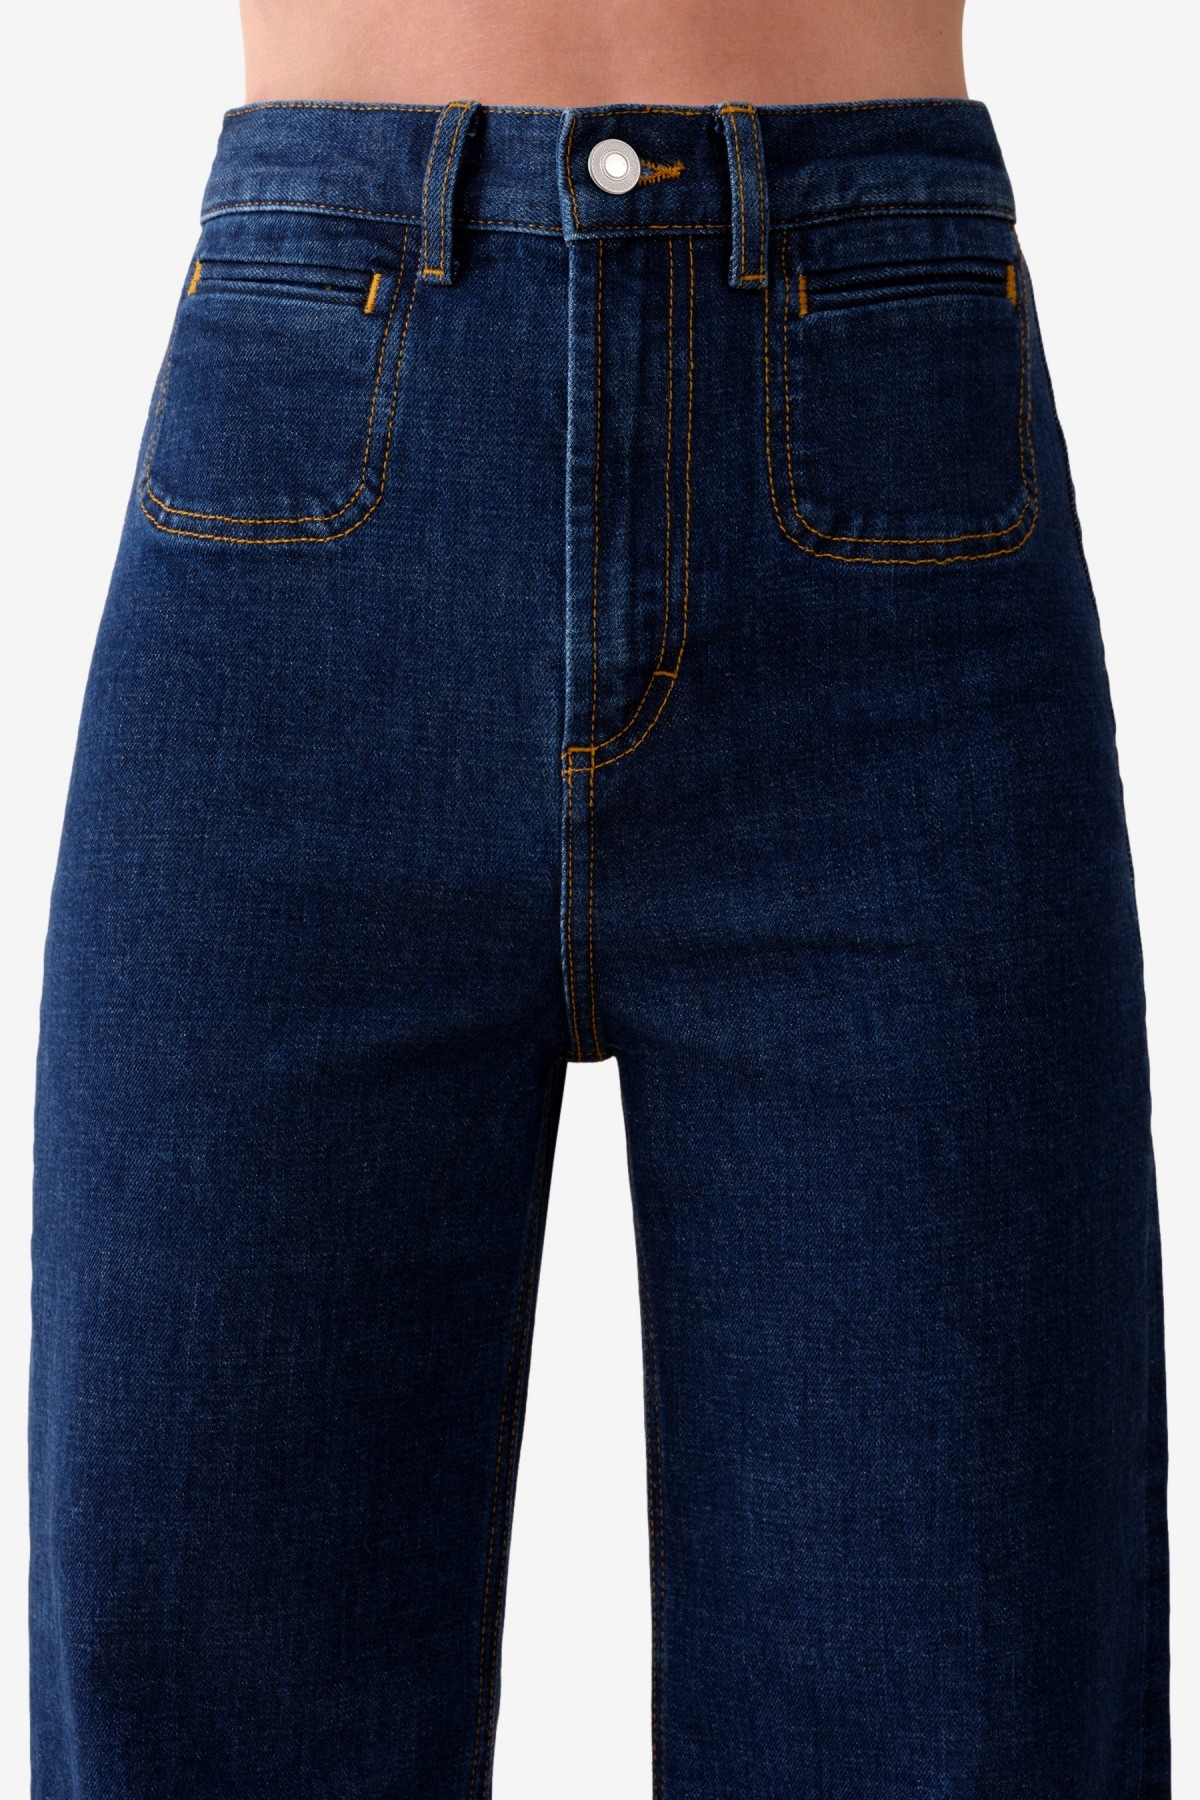 Jeanerica RW013 Roma Jeans in Blue 2 Weeks